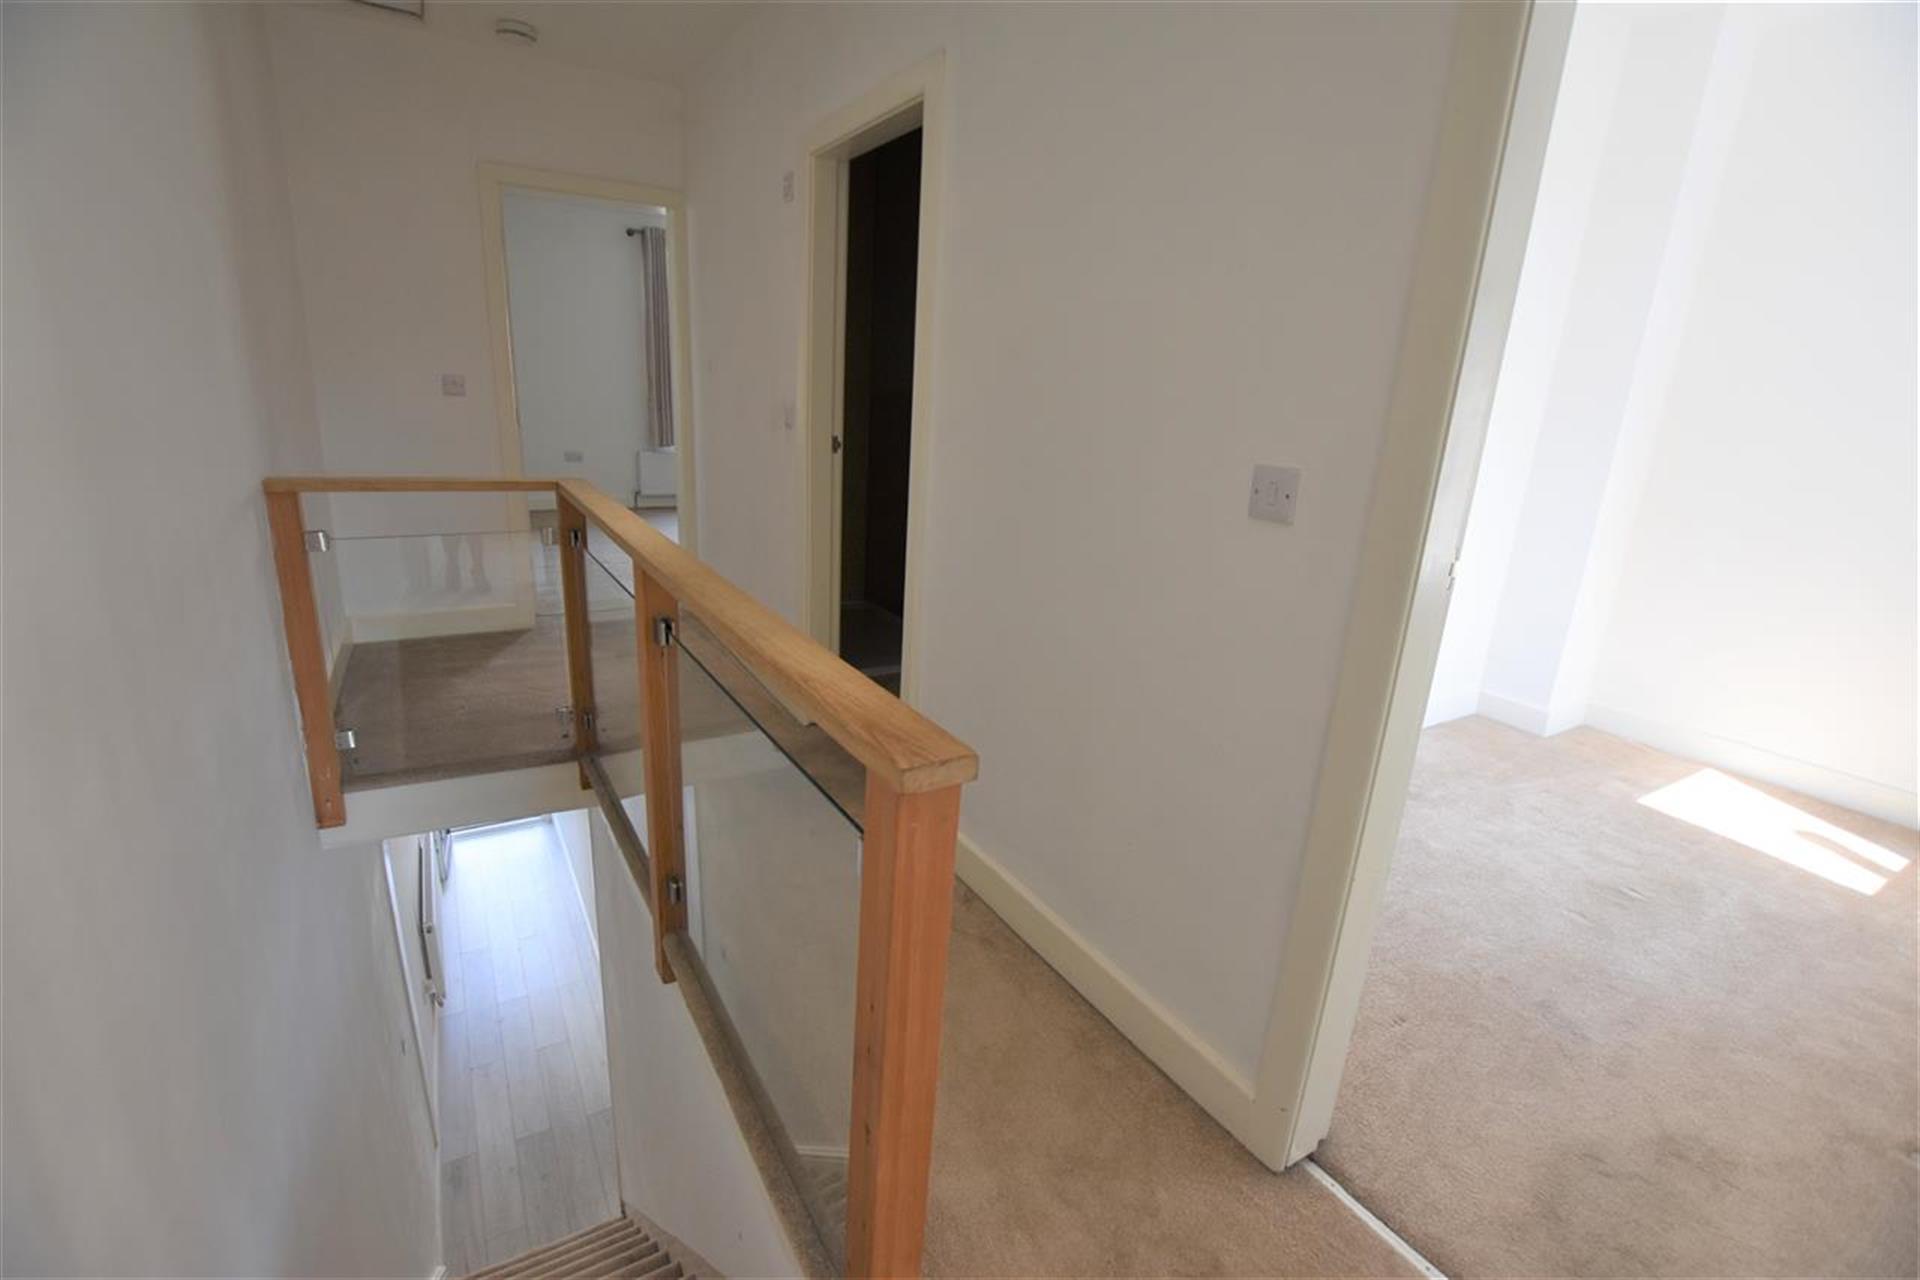 3 Bedroom End Terraced House For Sale - Hallway